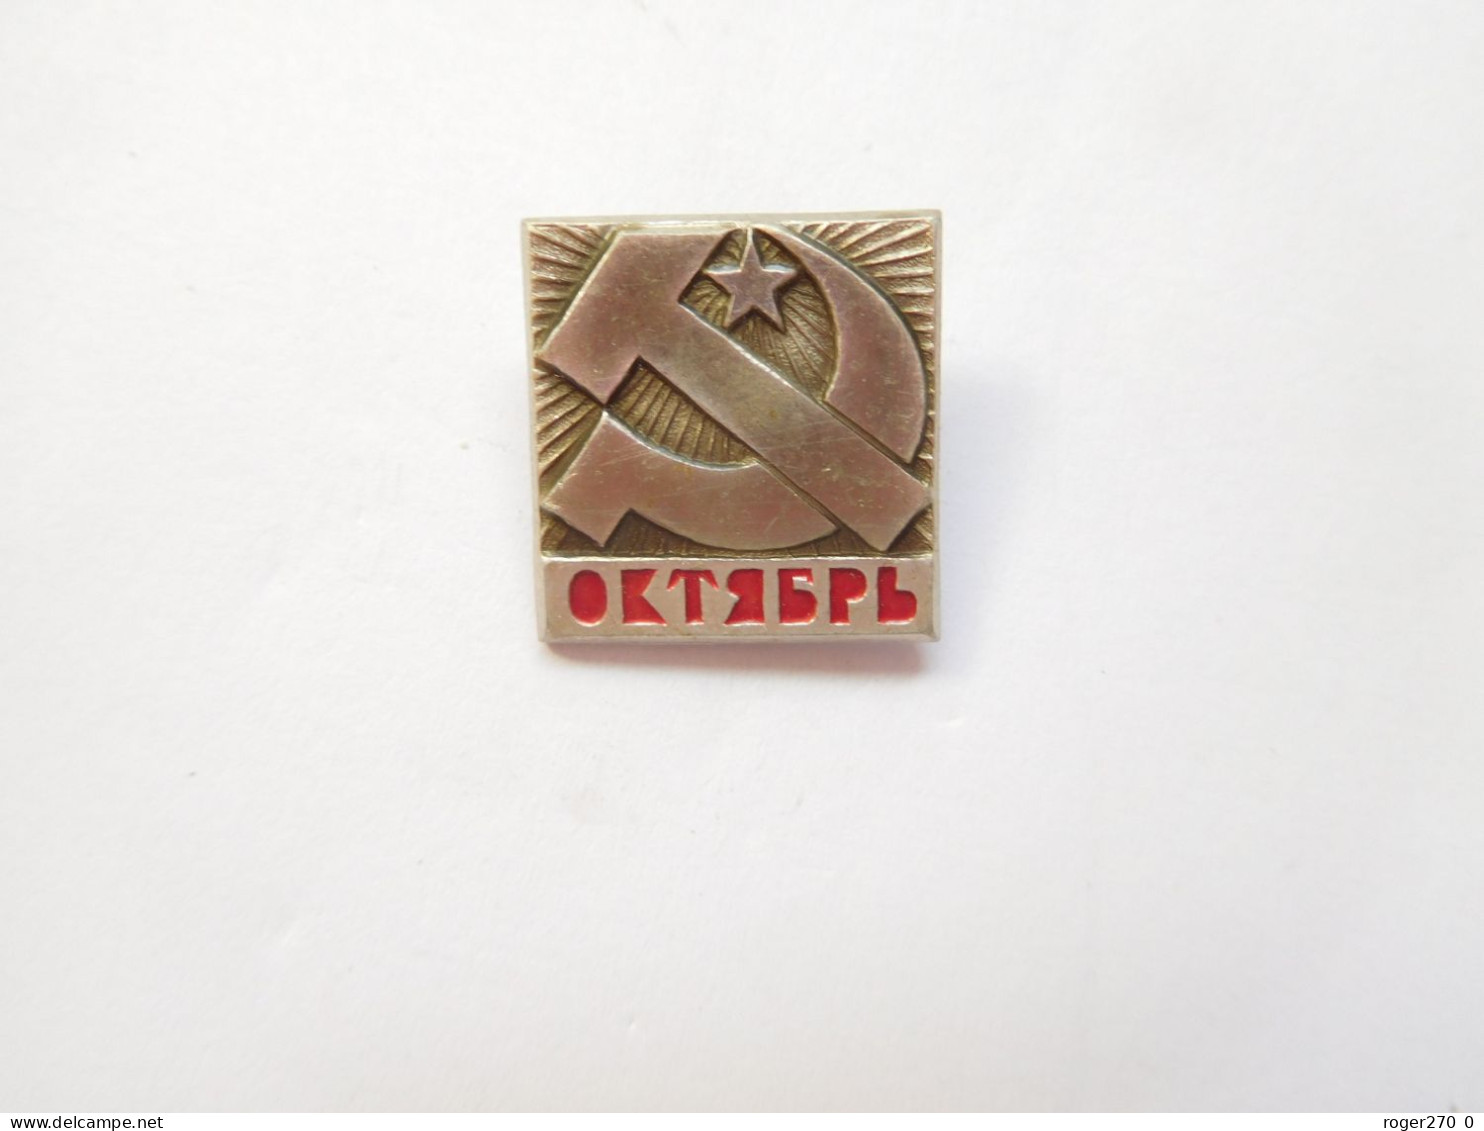 Belle Broche Russe ( No Pin's ) , Russie , CCCP - Städte